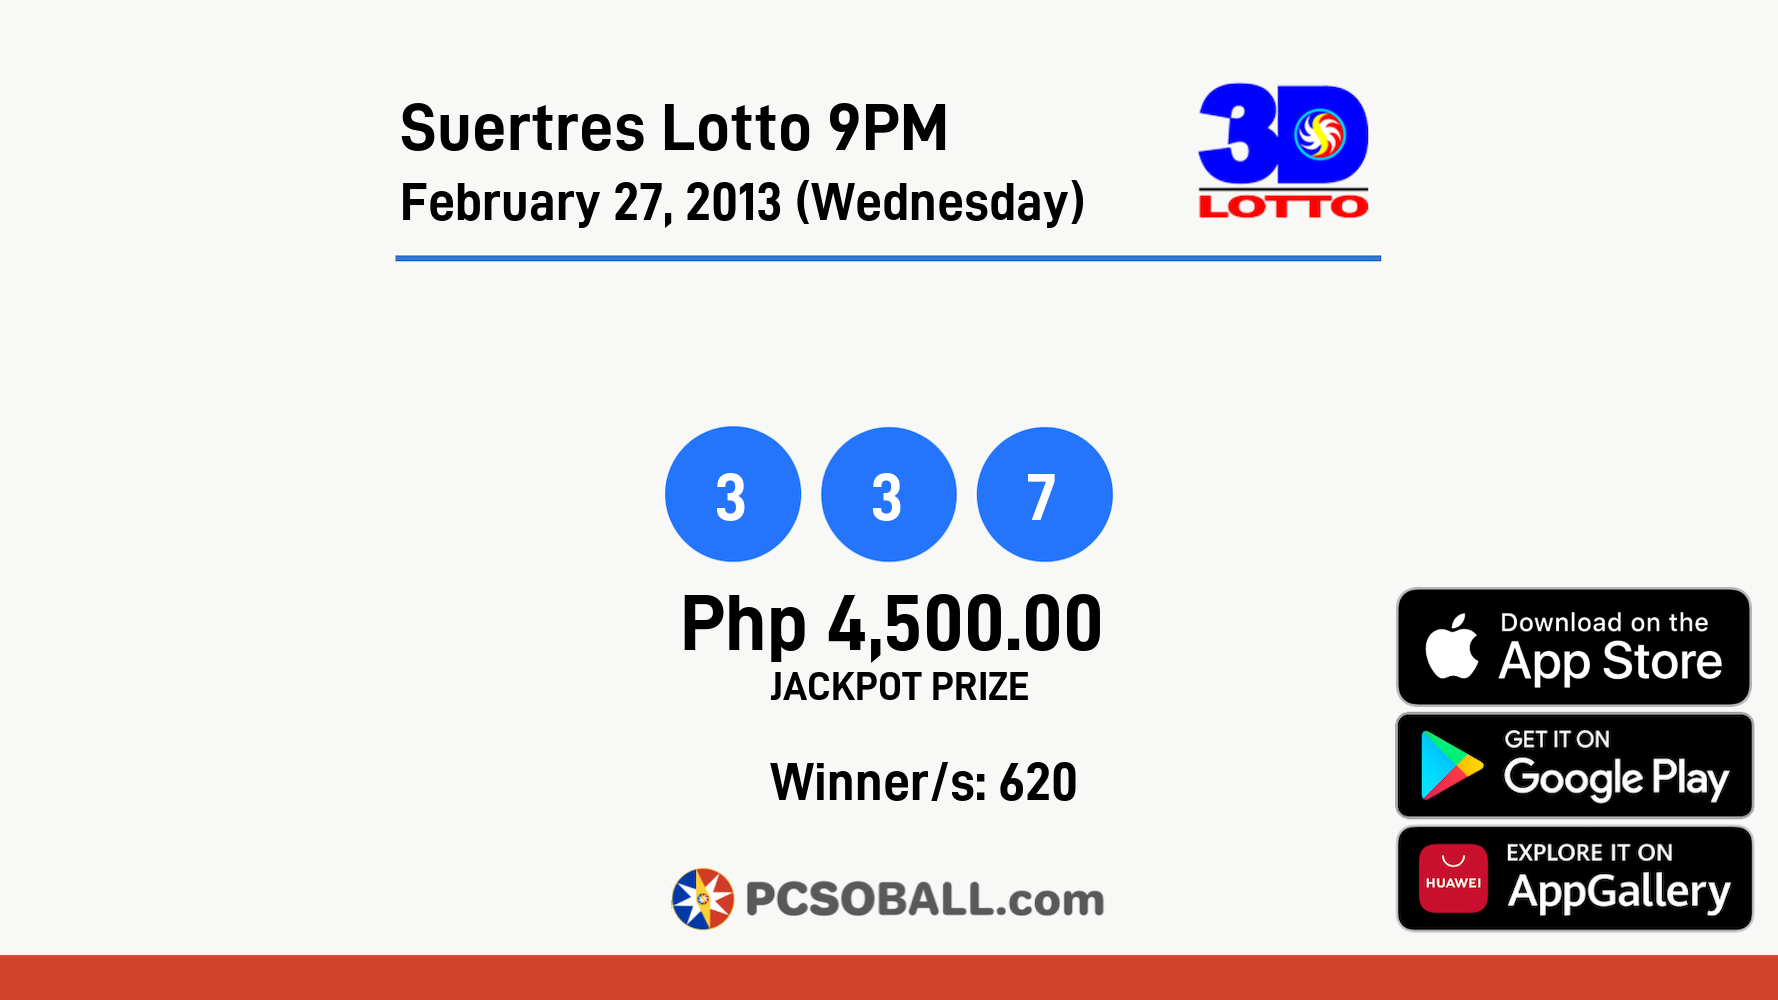 Suertres Lotto 9PM February 27, 2013 (Wednesday) Result